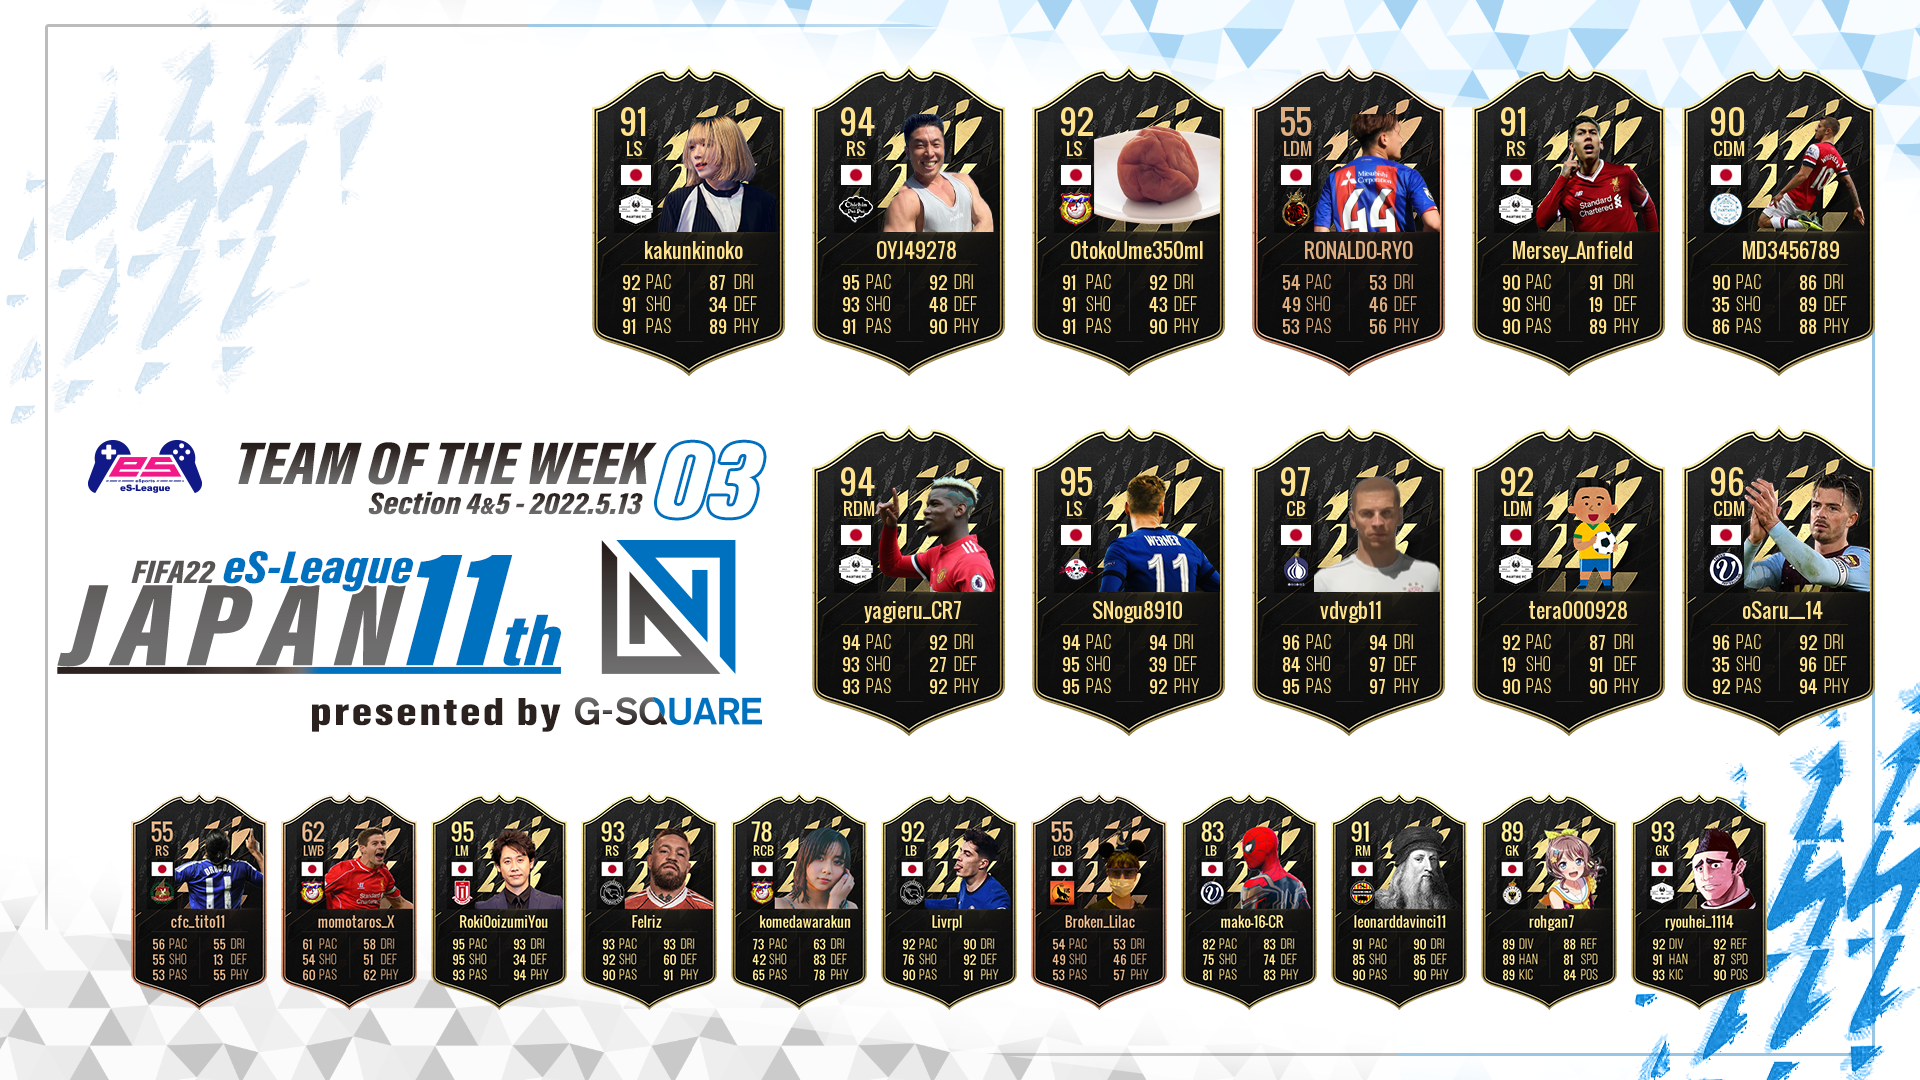 FIFA22 eS-League JAPAN 11th presented by G-SQUARE TOTW03